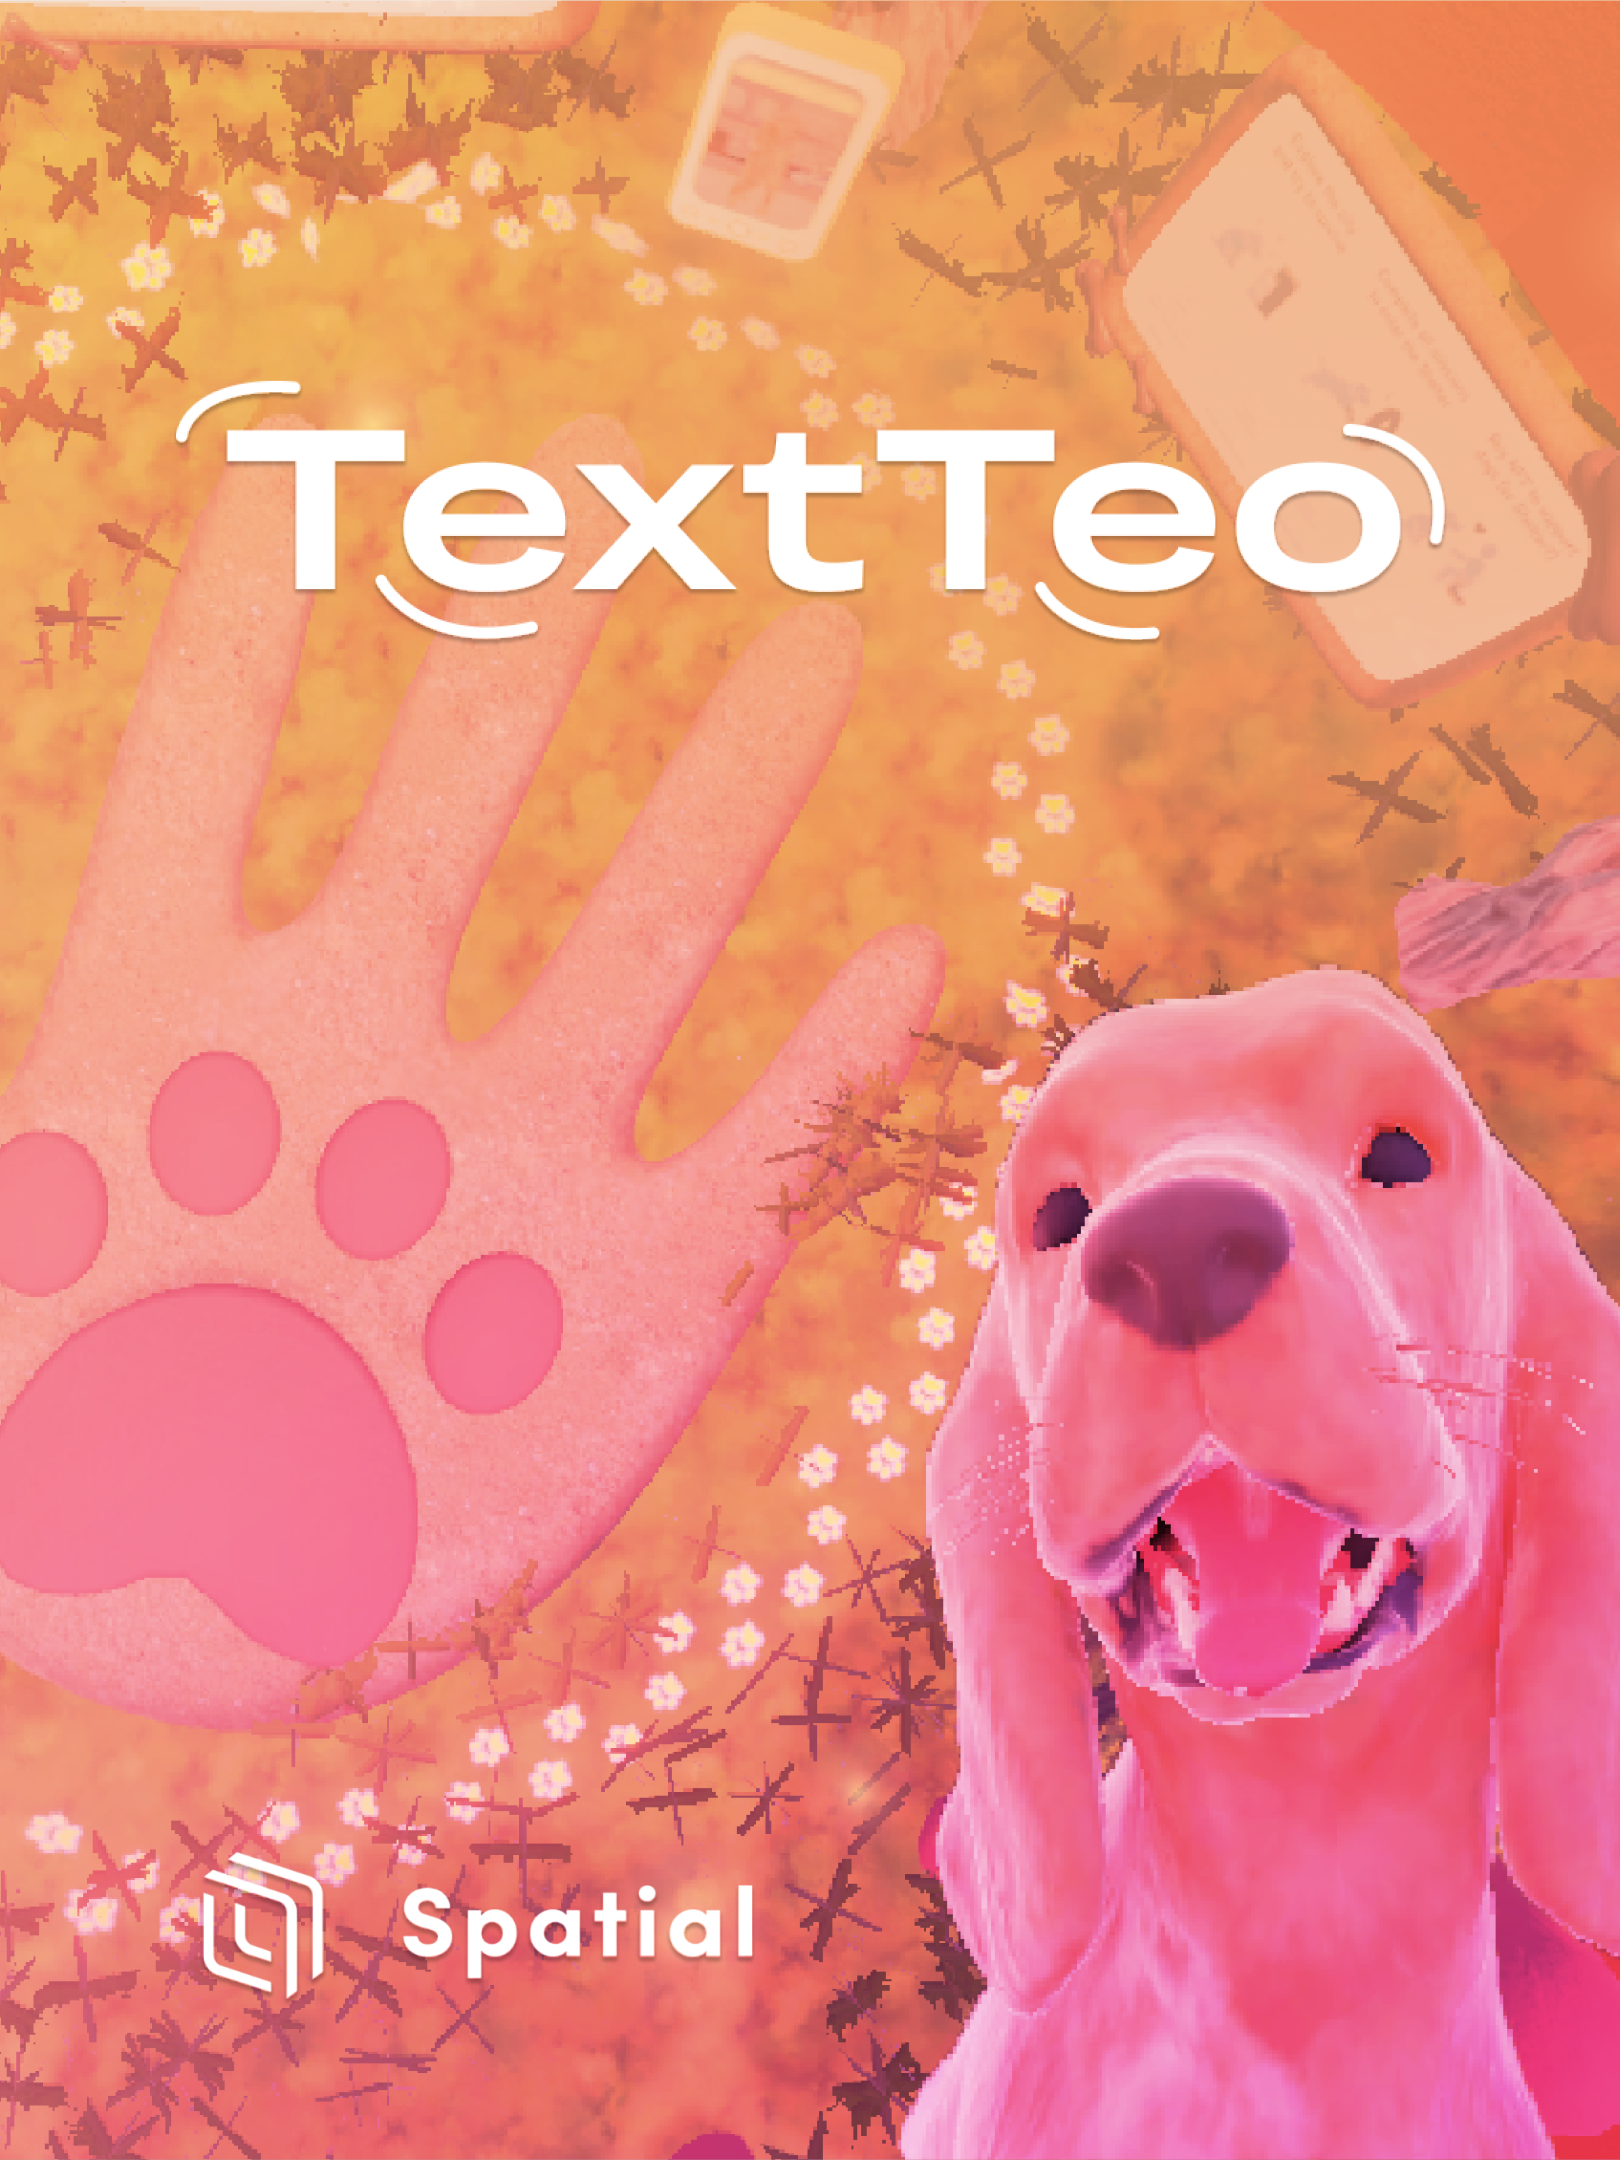 Poster containing the TextTeo logo along with a picture of a virtual dog and the Spatial logo